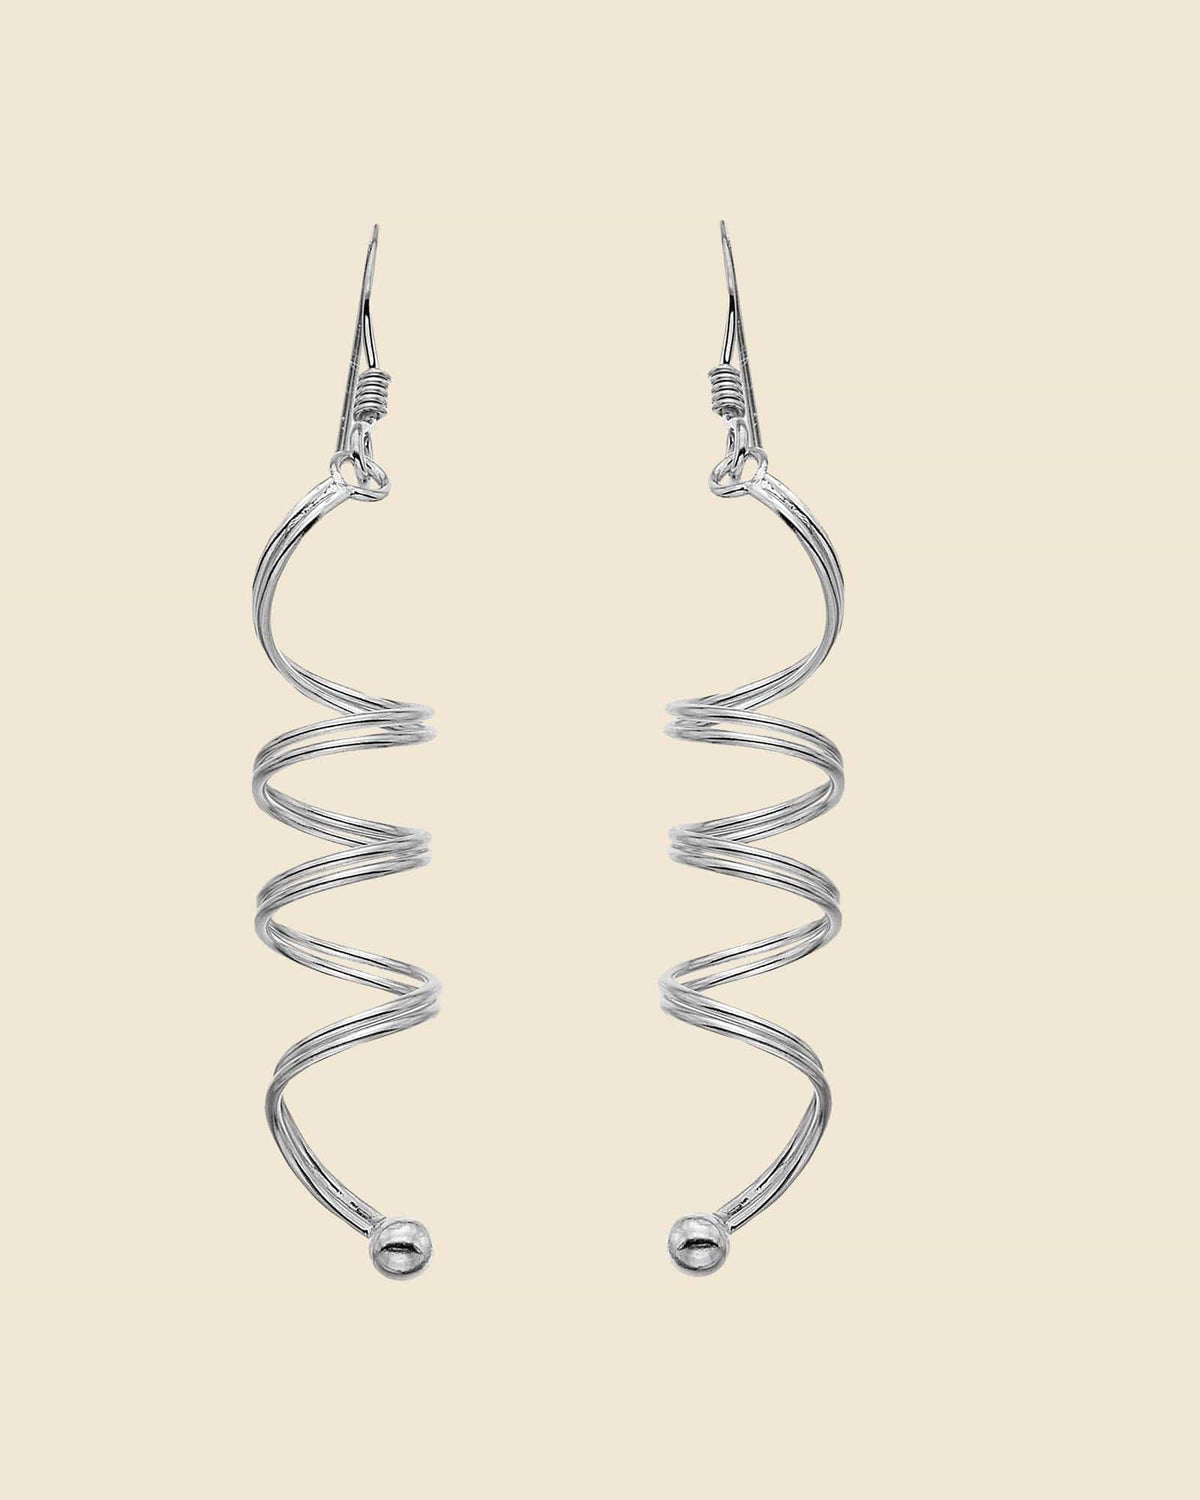 Spiral Earrings - One Piece Design in Sterling Silver. – The